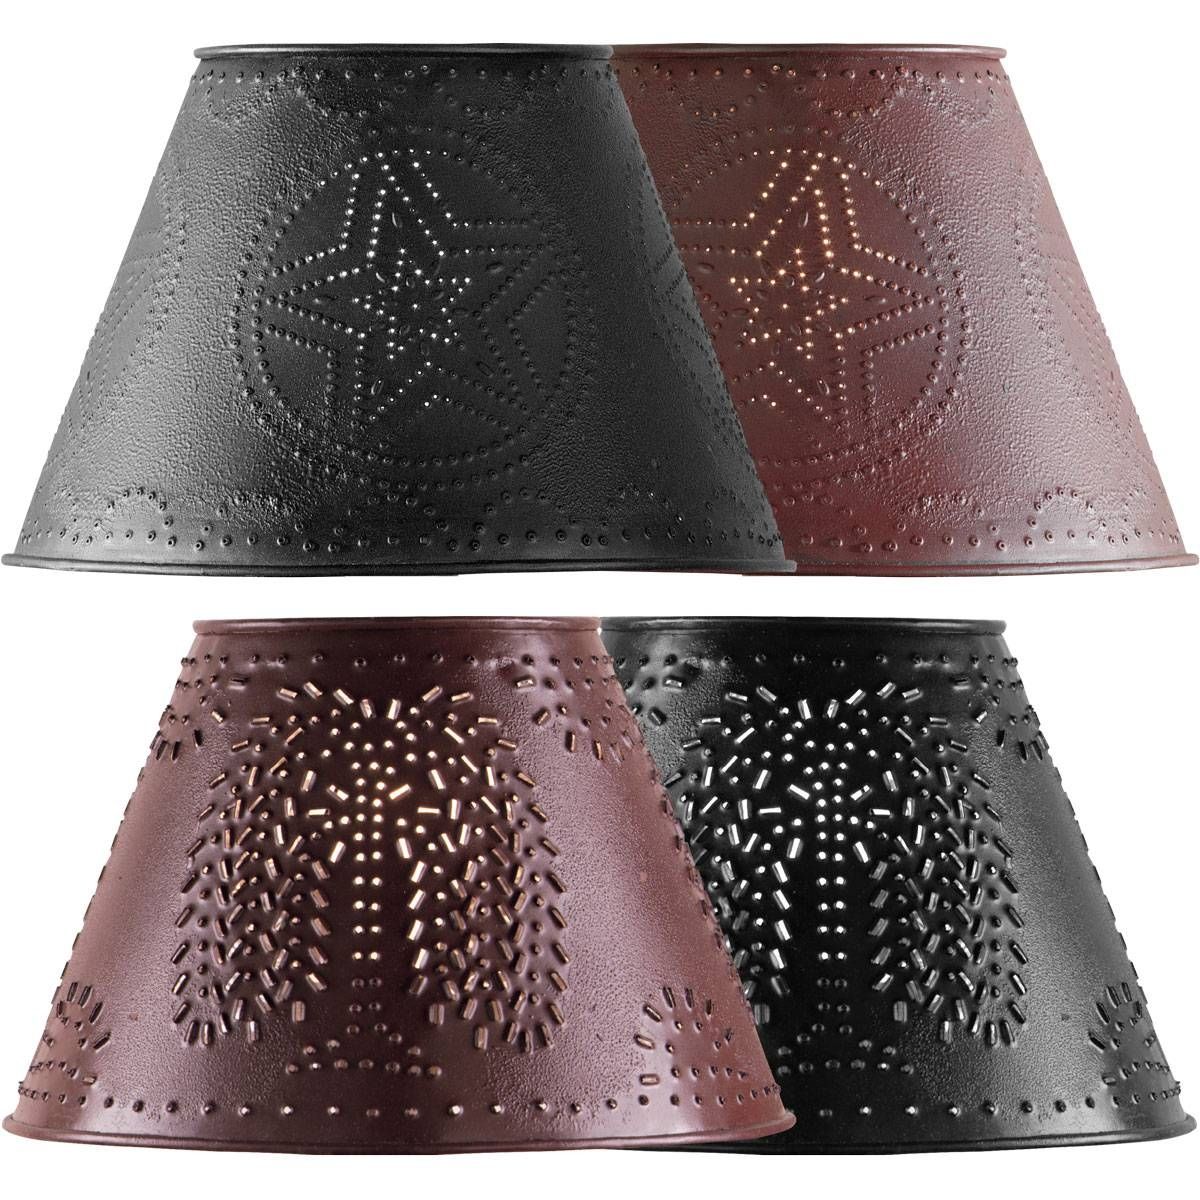 Punched Tin Lamp Shades: Primitive Home Decors Intended For Punched Tin Lights Fixtures (View 4 of 15)